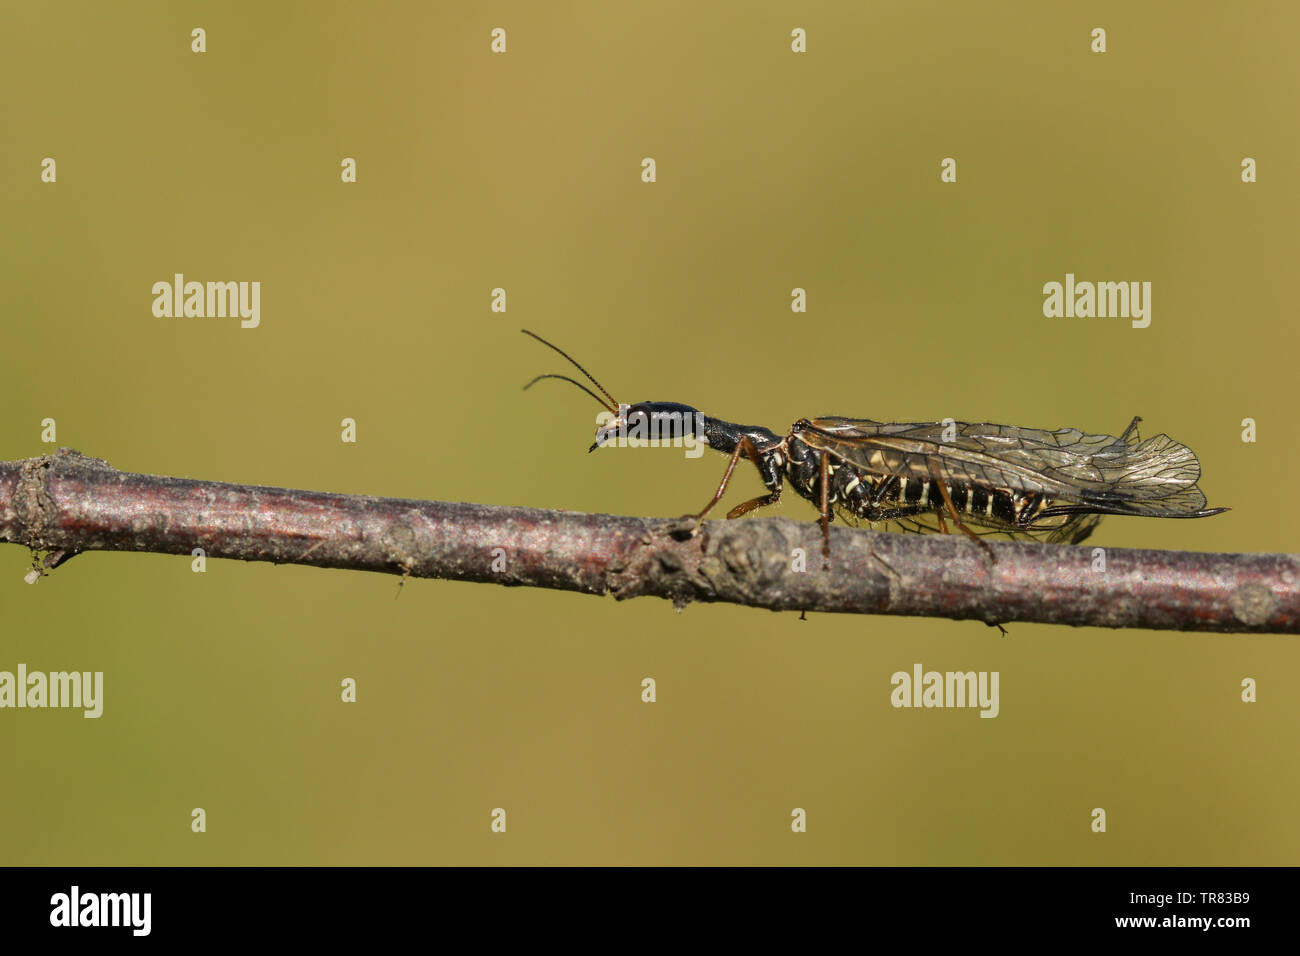 A Snakefly, Rhapidioptera, walking along a twig. Snakeflies are rarely encountered as they spend most of their adult lives in the tree canopy. Stock Photo